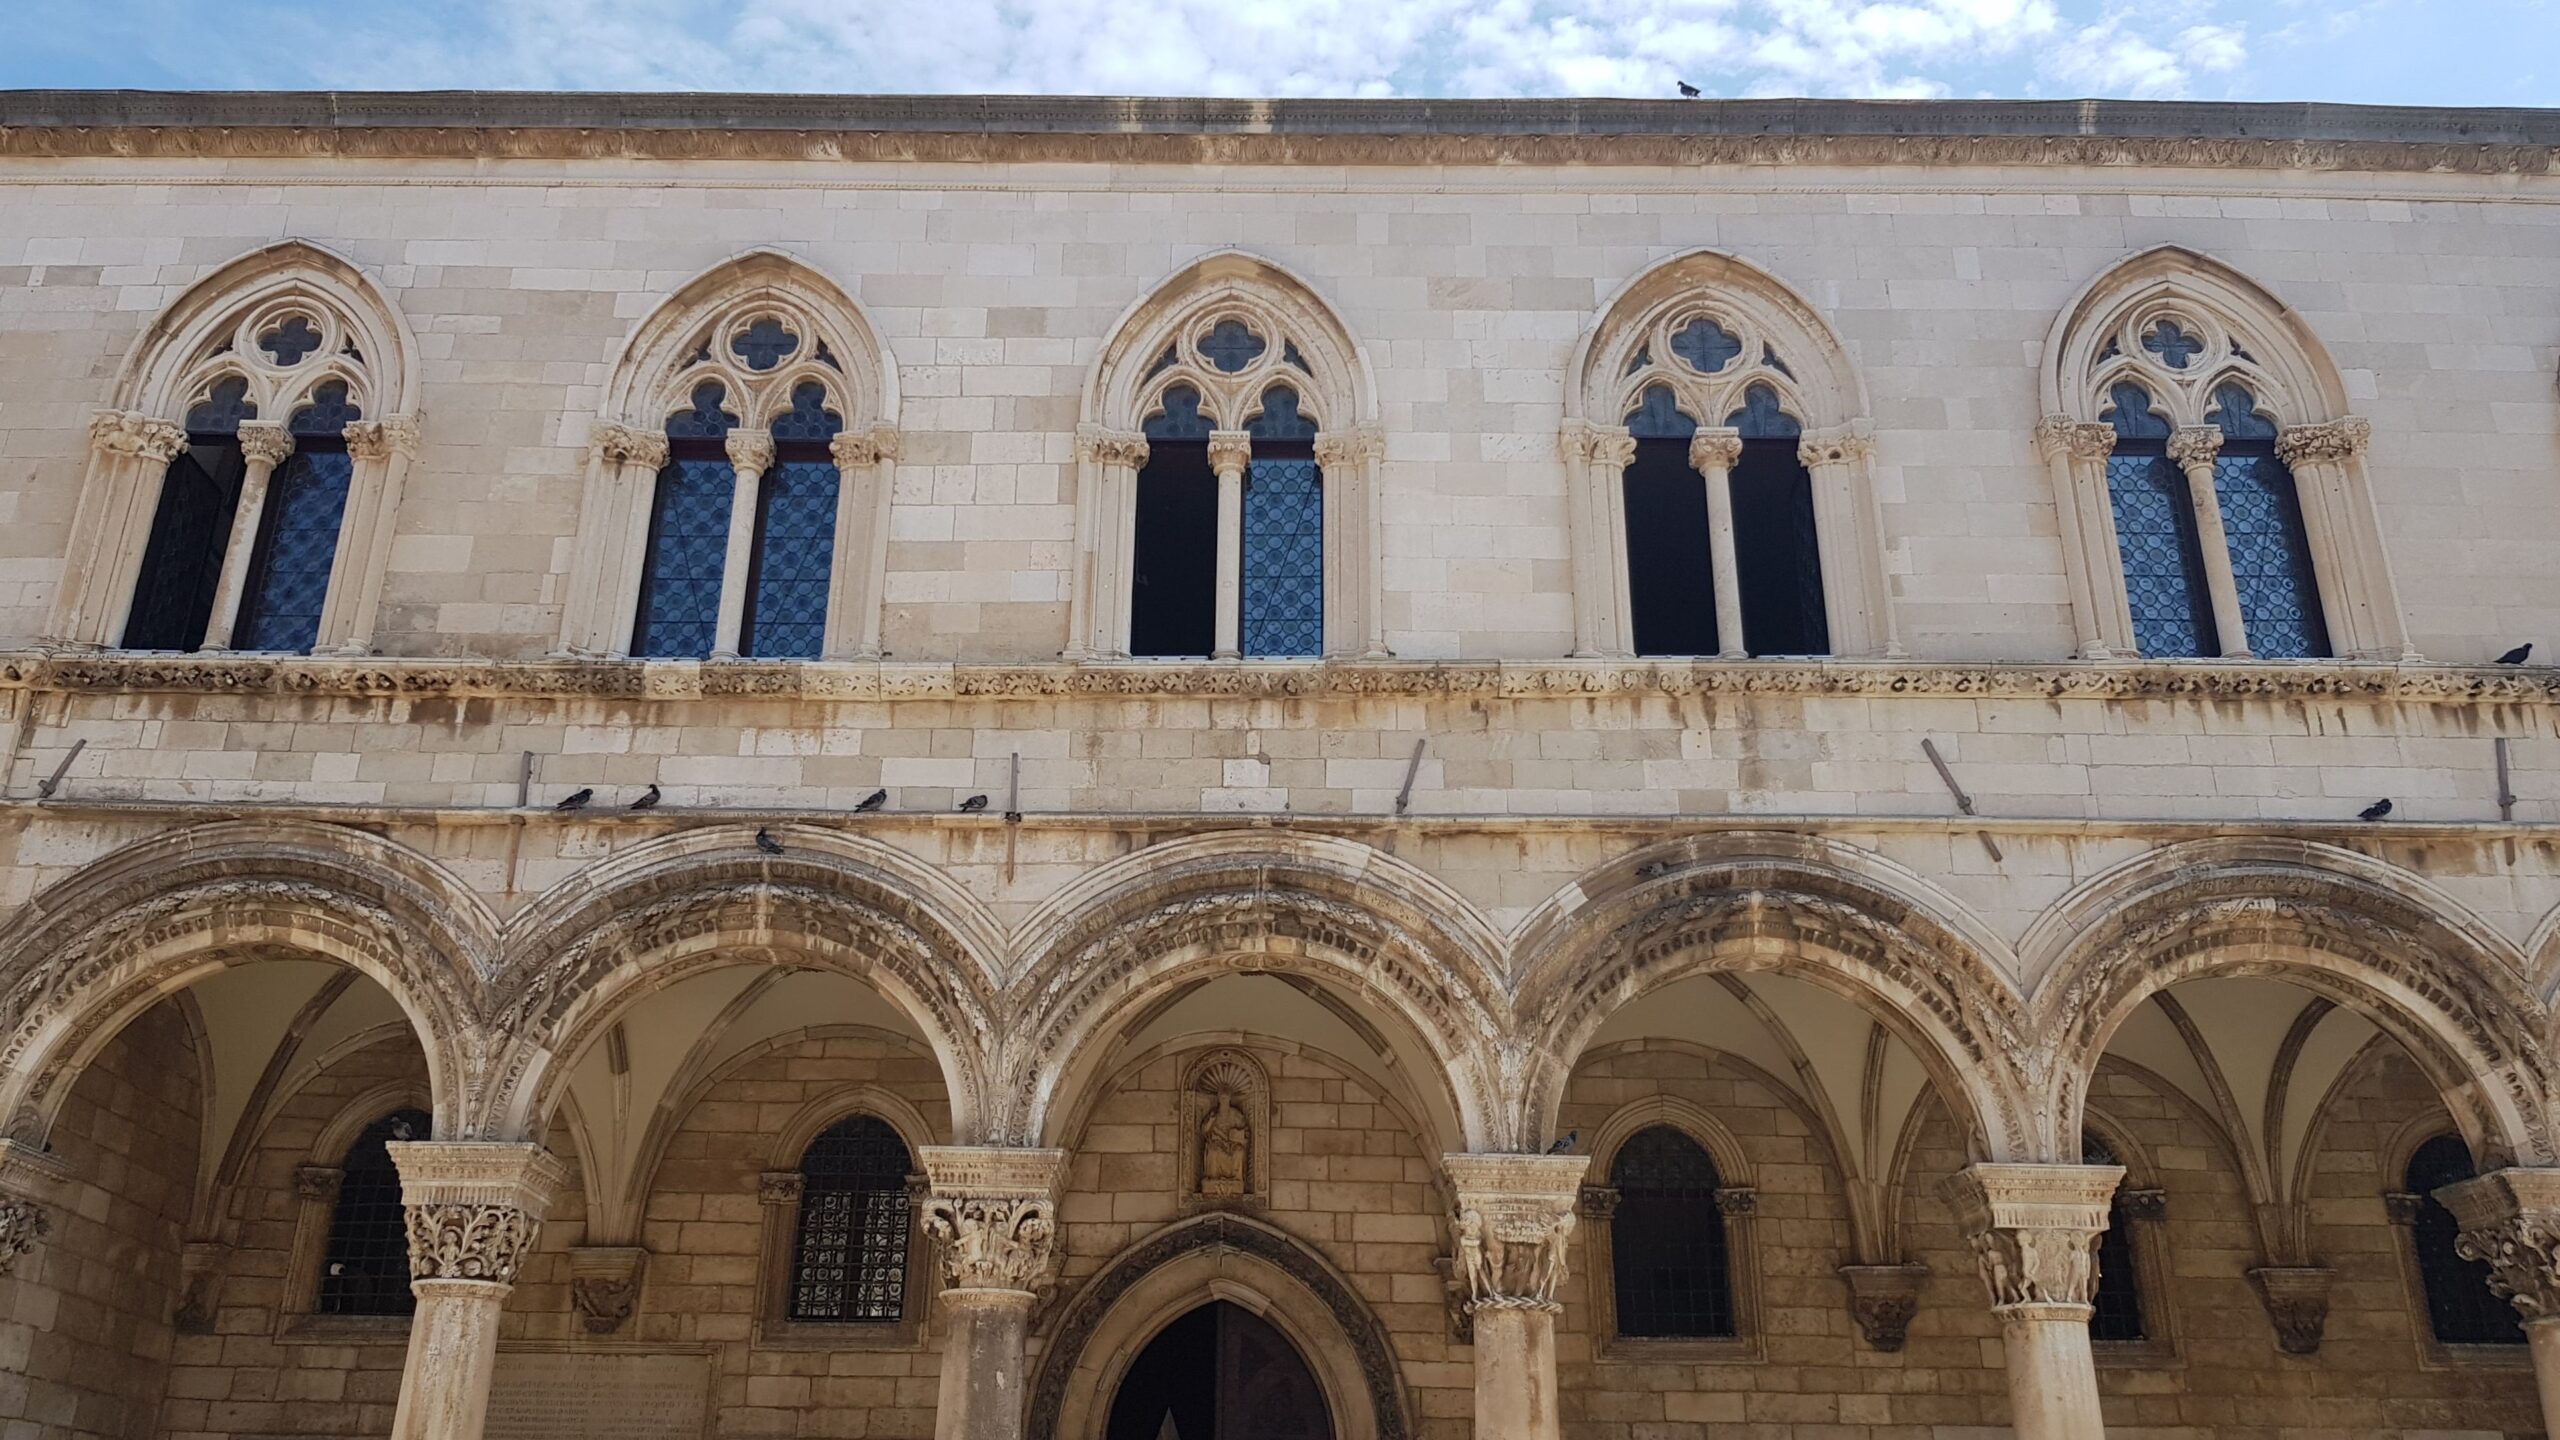 Rector’s Palace